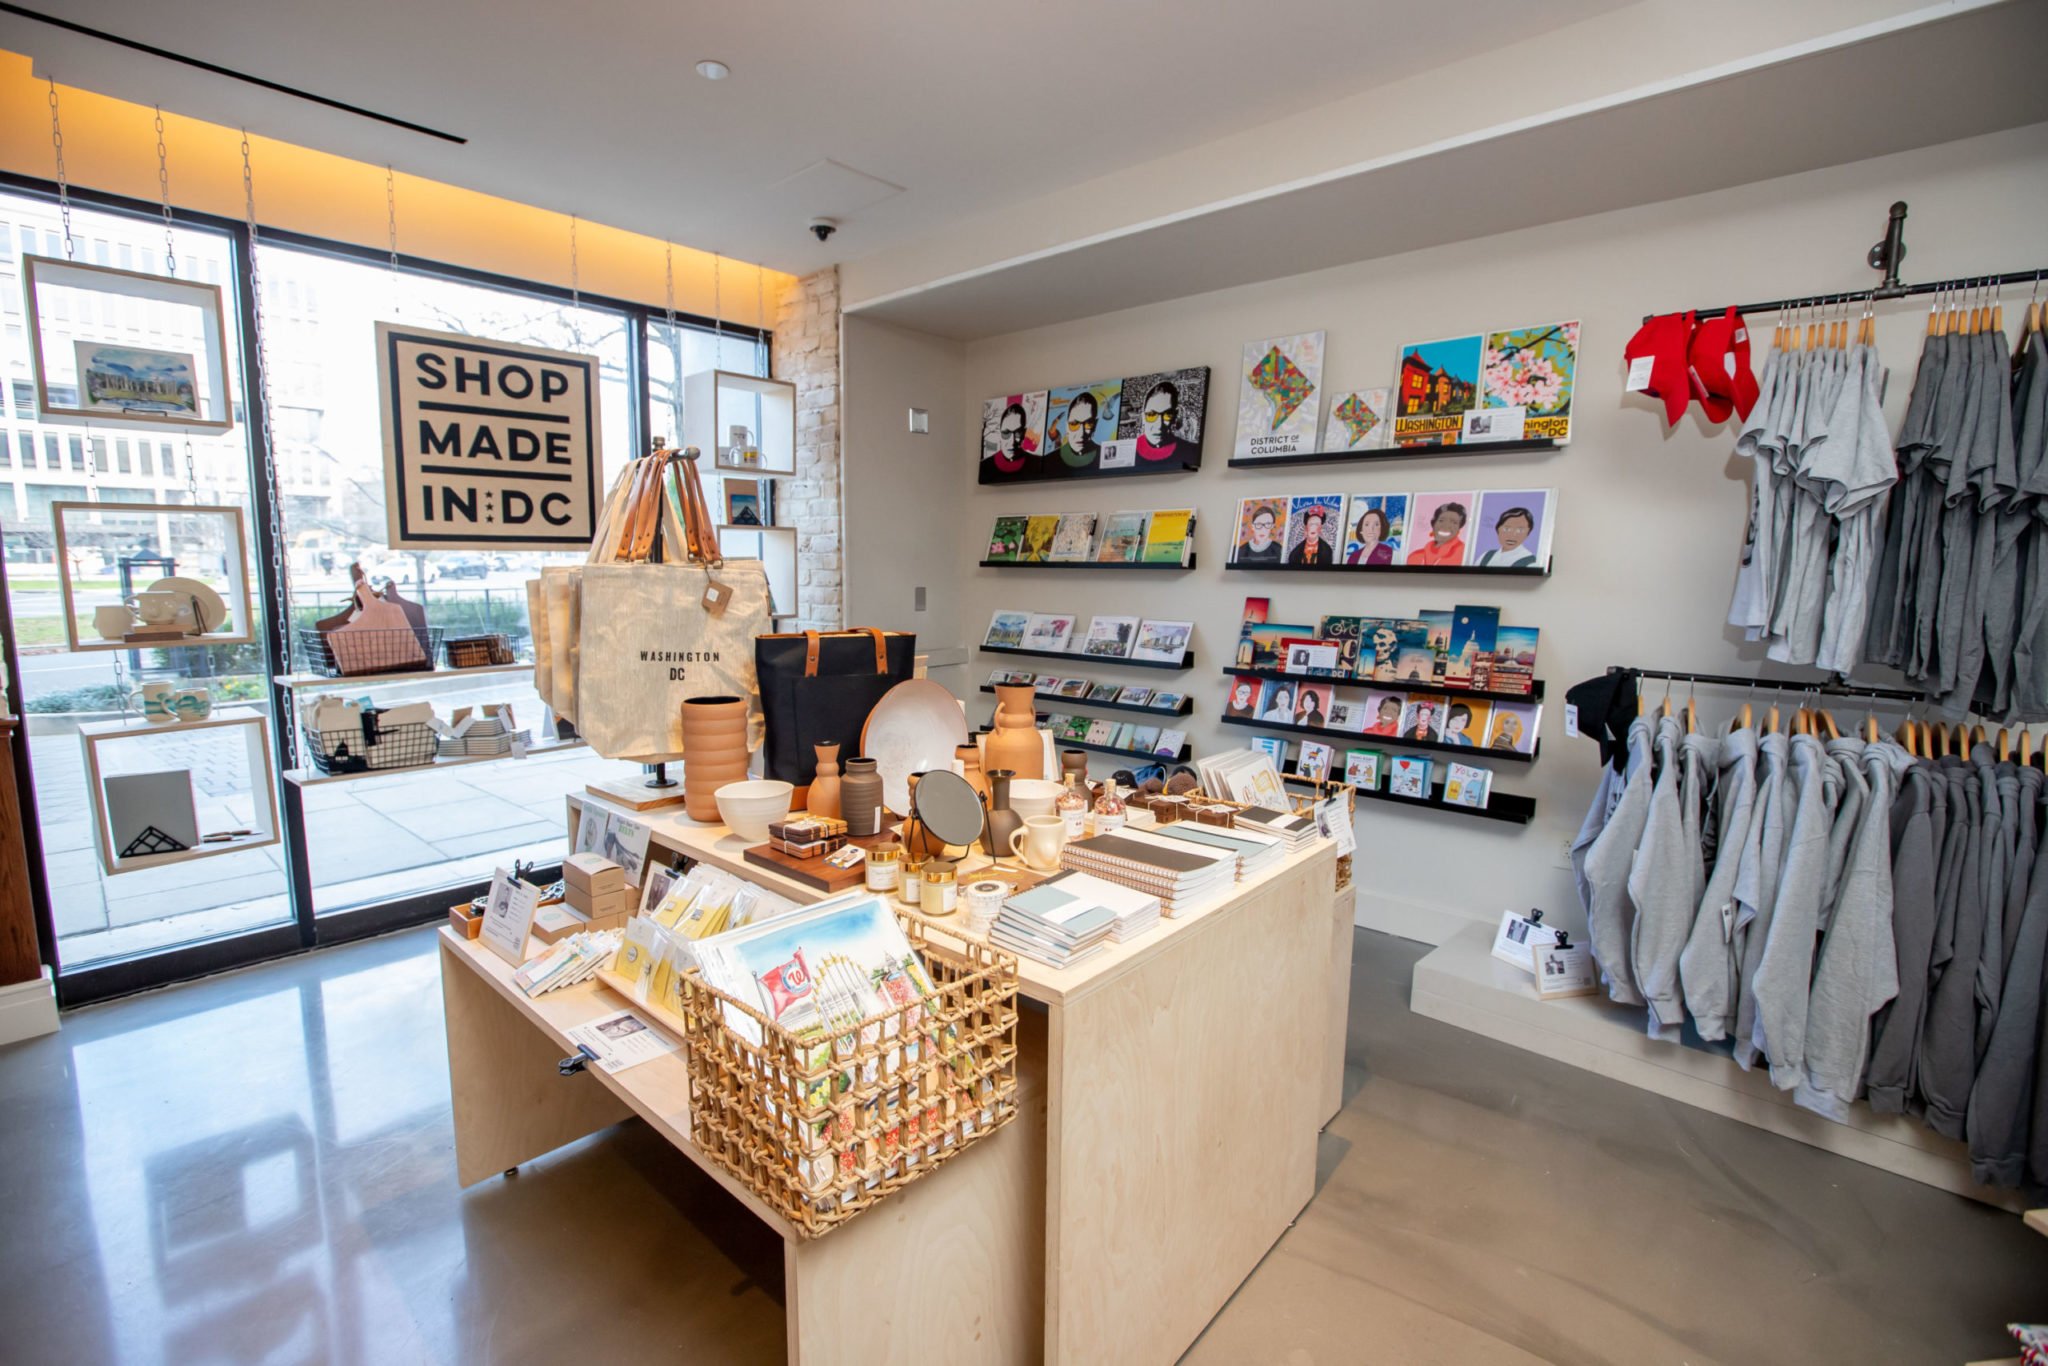 Shop Made In DC is the only retailer opening at the Roost. Photo courtesy of Shop Made In DC.